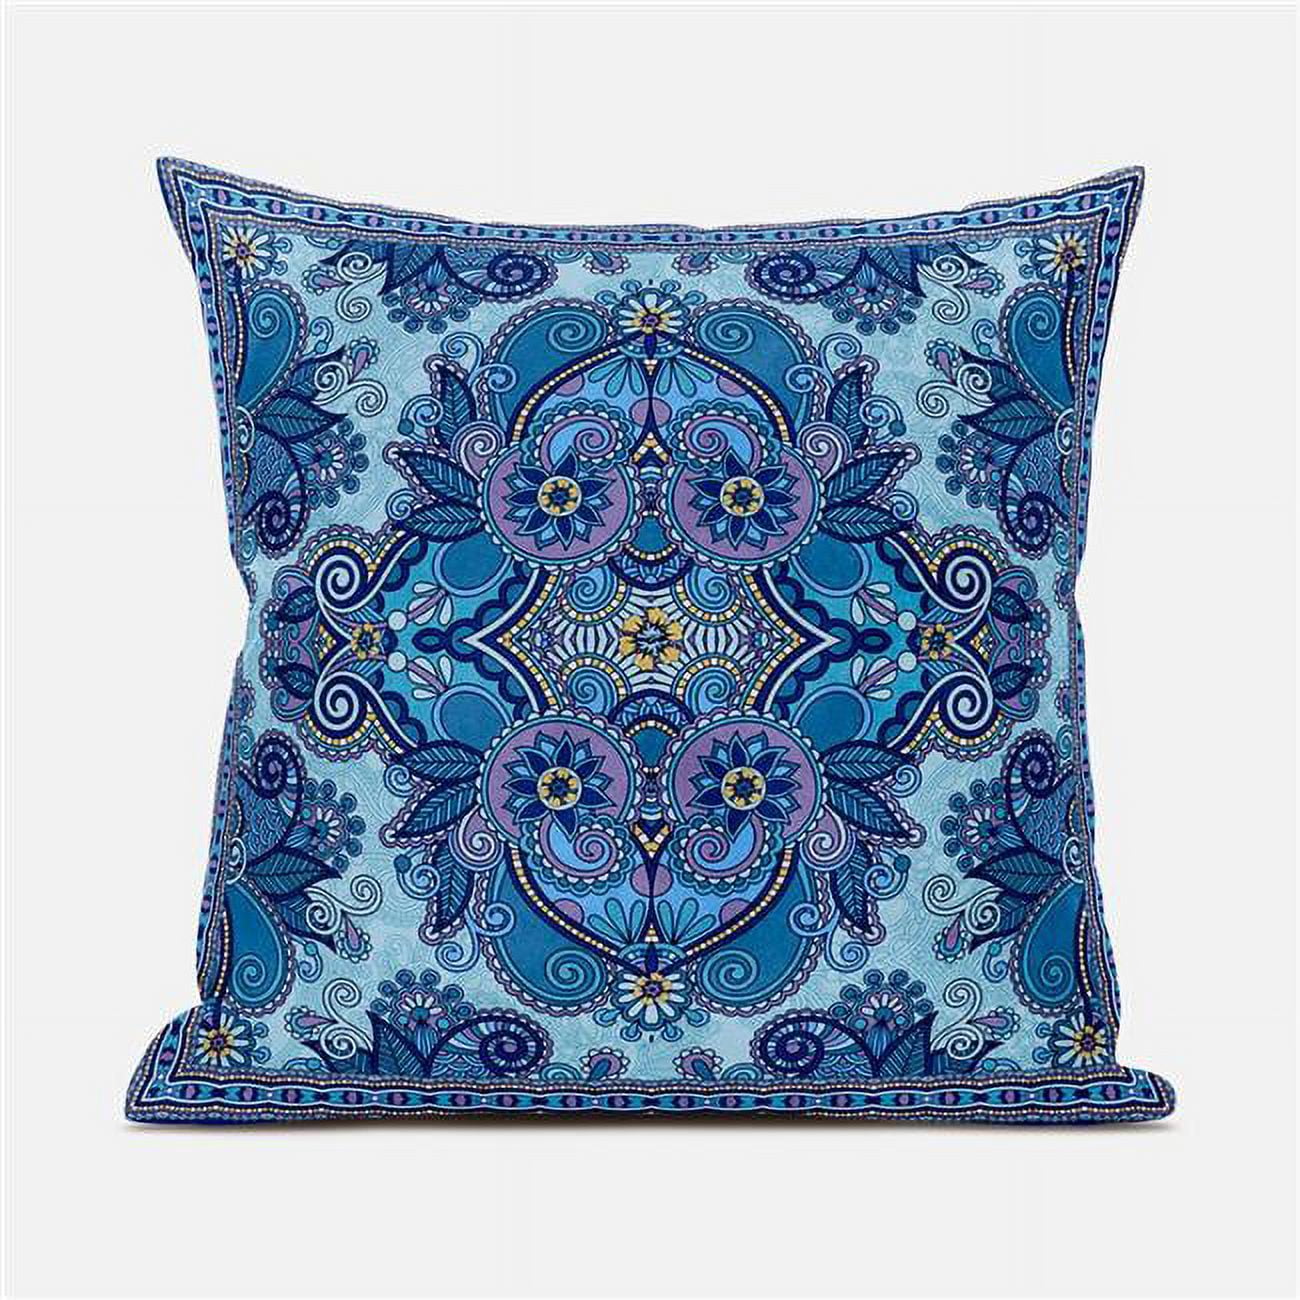 Picture of Amrita Sen Designs CAPL1004FSDS-ZP-16x16 16 x 16 in. Floral Paisley Suede Zippered Pillow with Insert - Blue & Purple